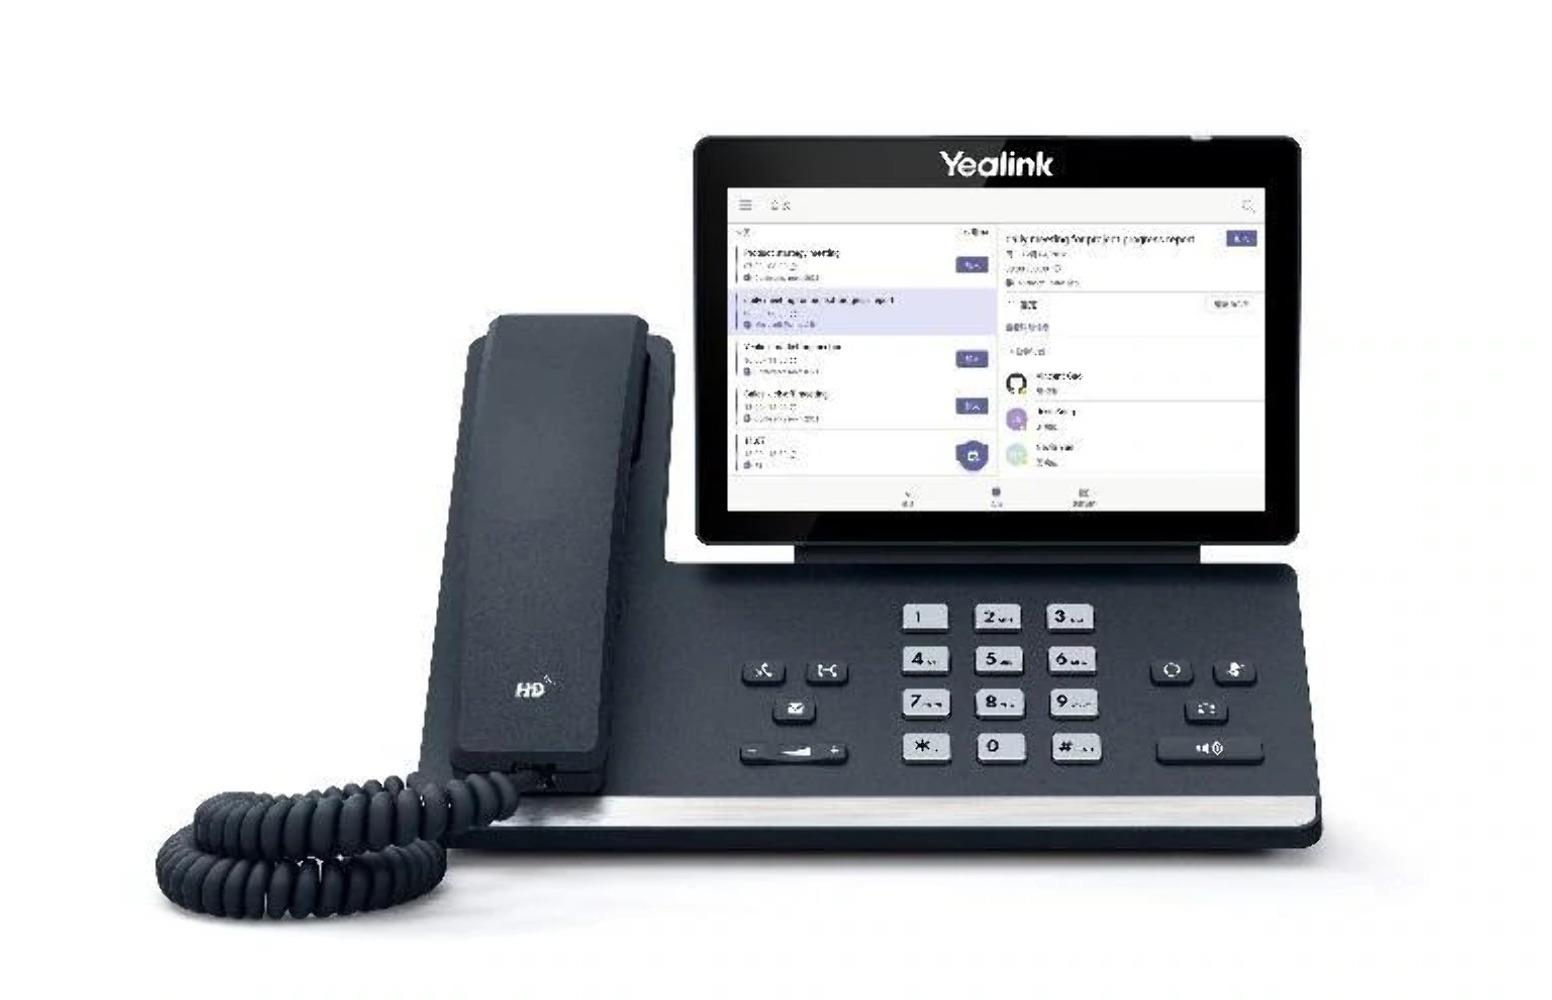 Yealink T56a 16 Line Ip Hd Android Phone, 7' 1024 X 600 Colour Touch